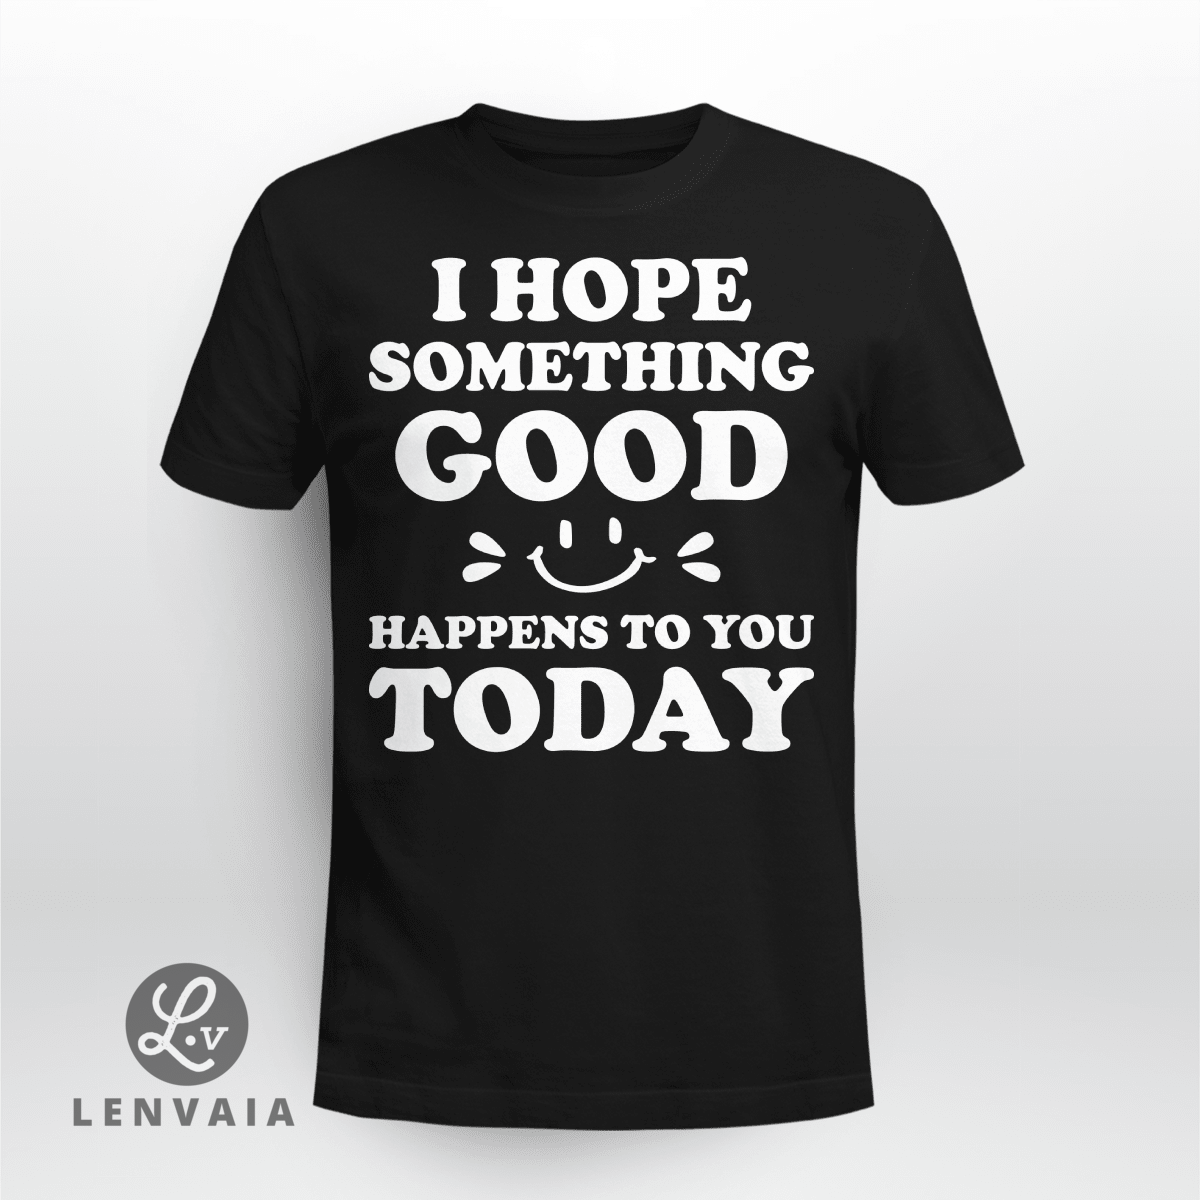 I hope something good happens to you today T-shirt